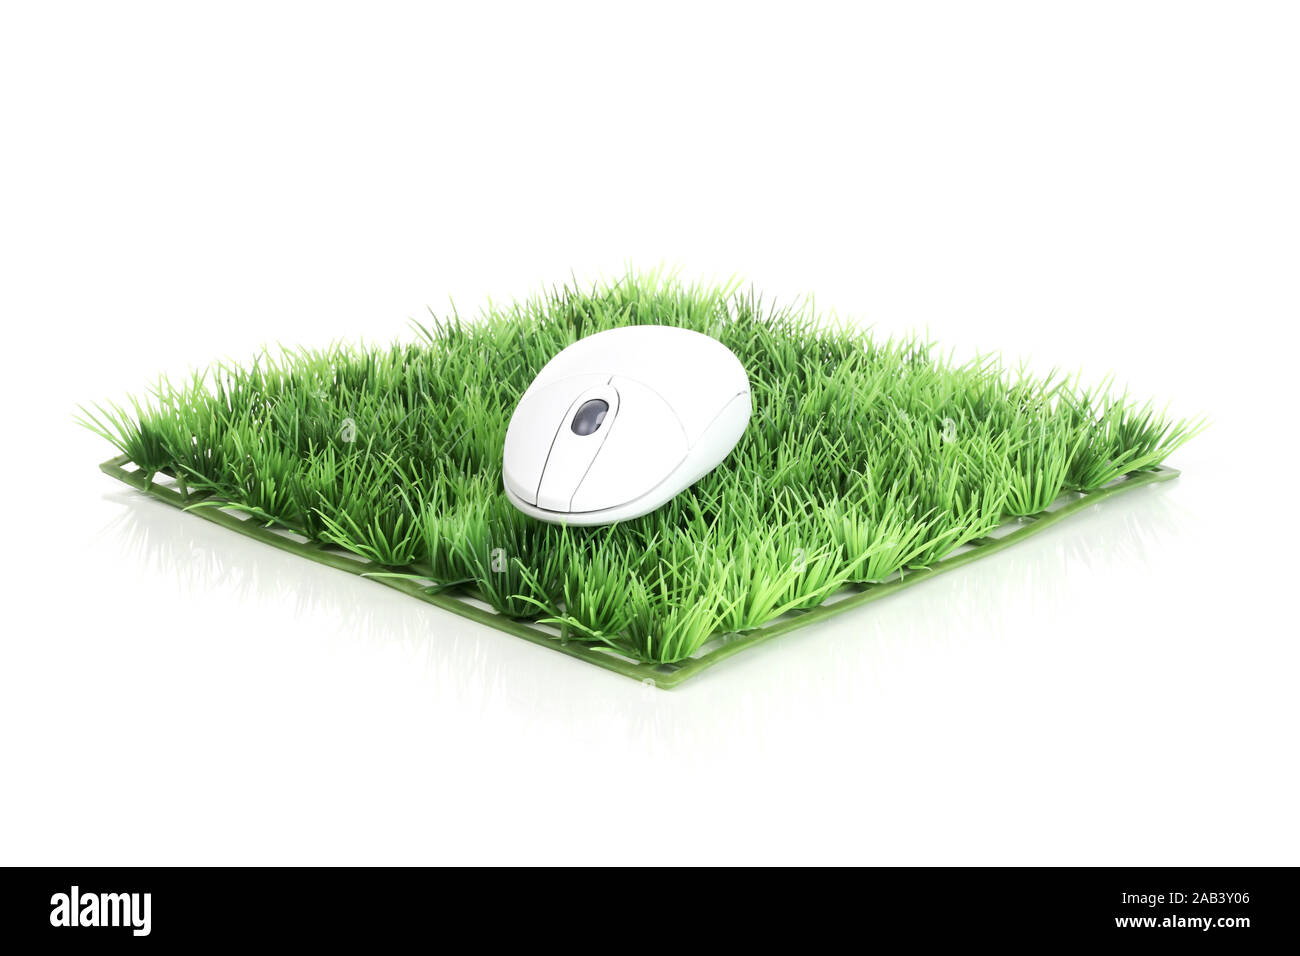 Artificial Grass Cut Out Stock Images & Pictures - Alamy